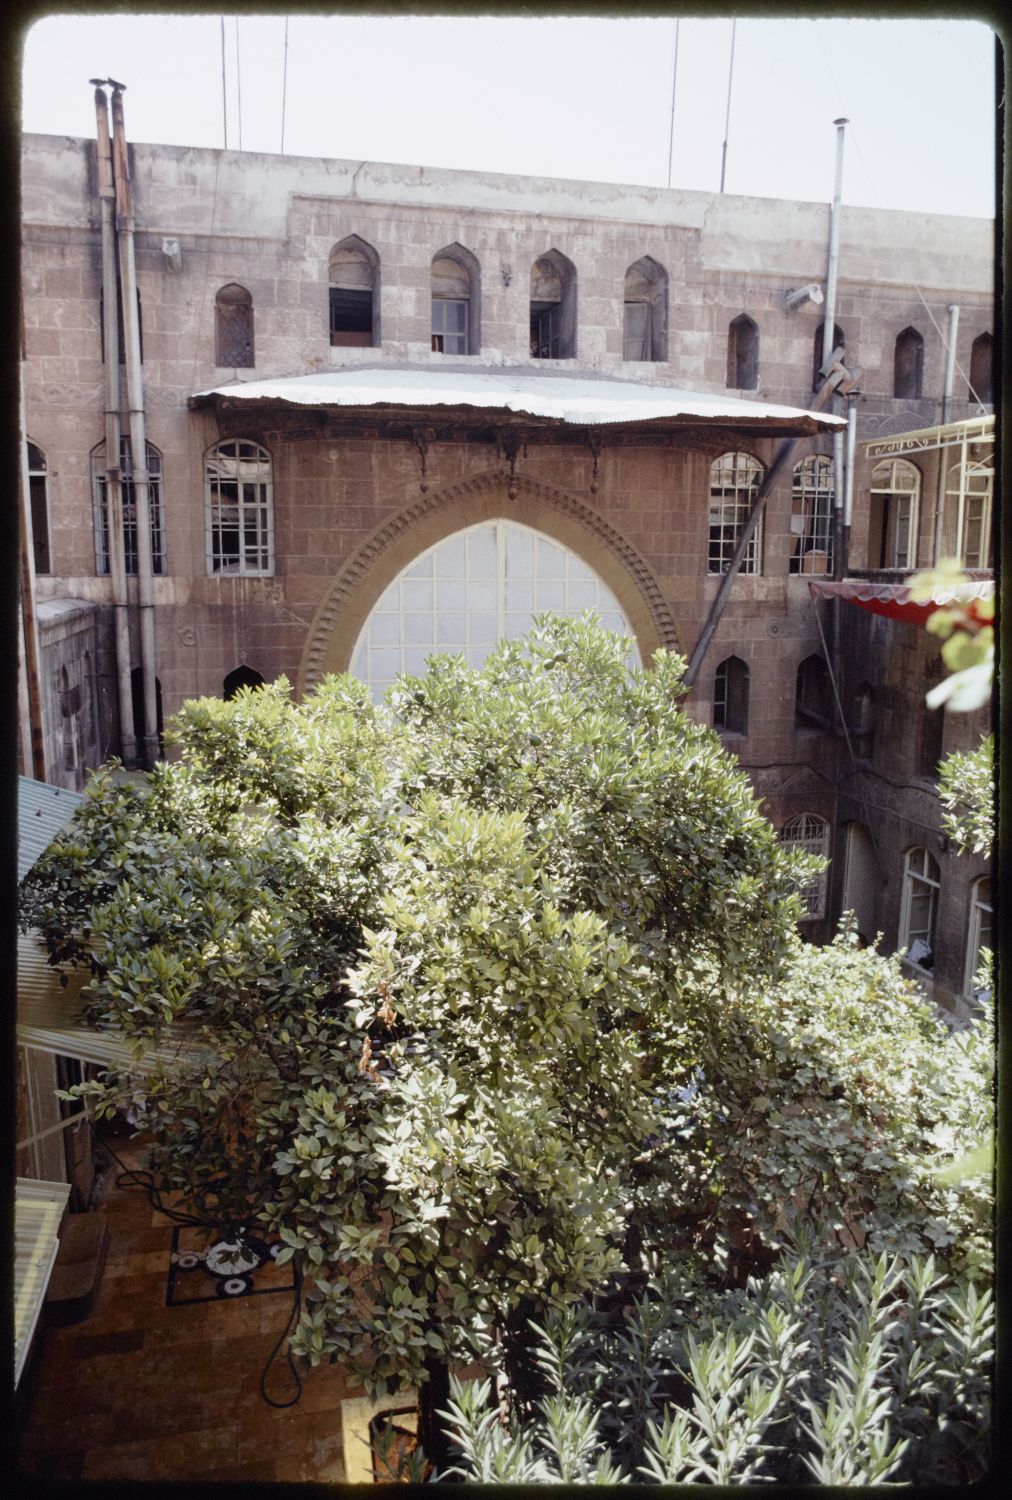 View into courtyard.